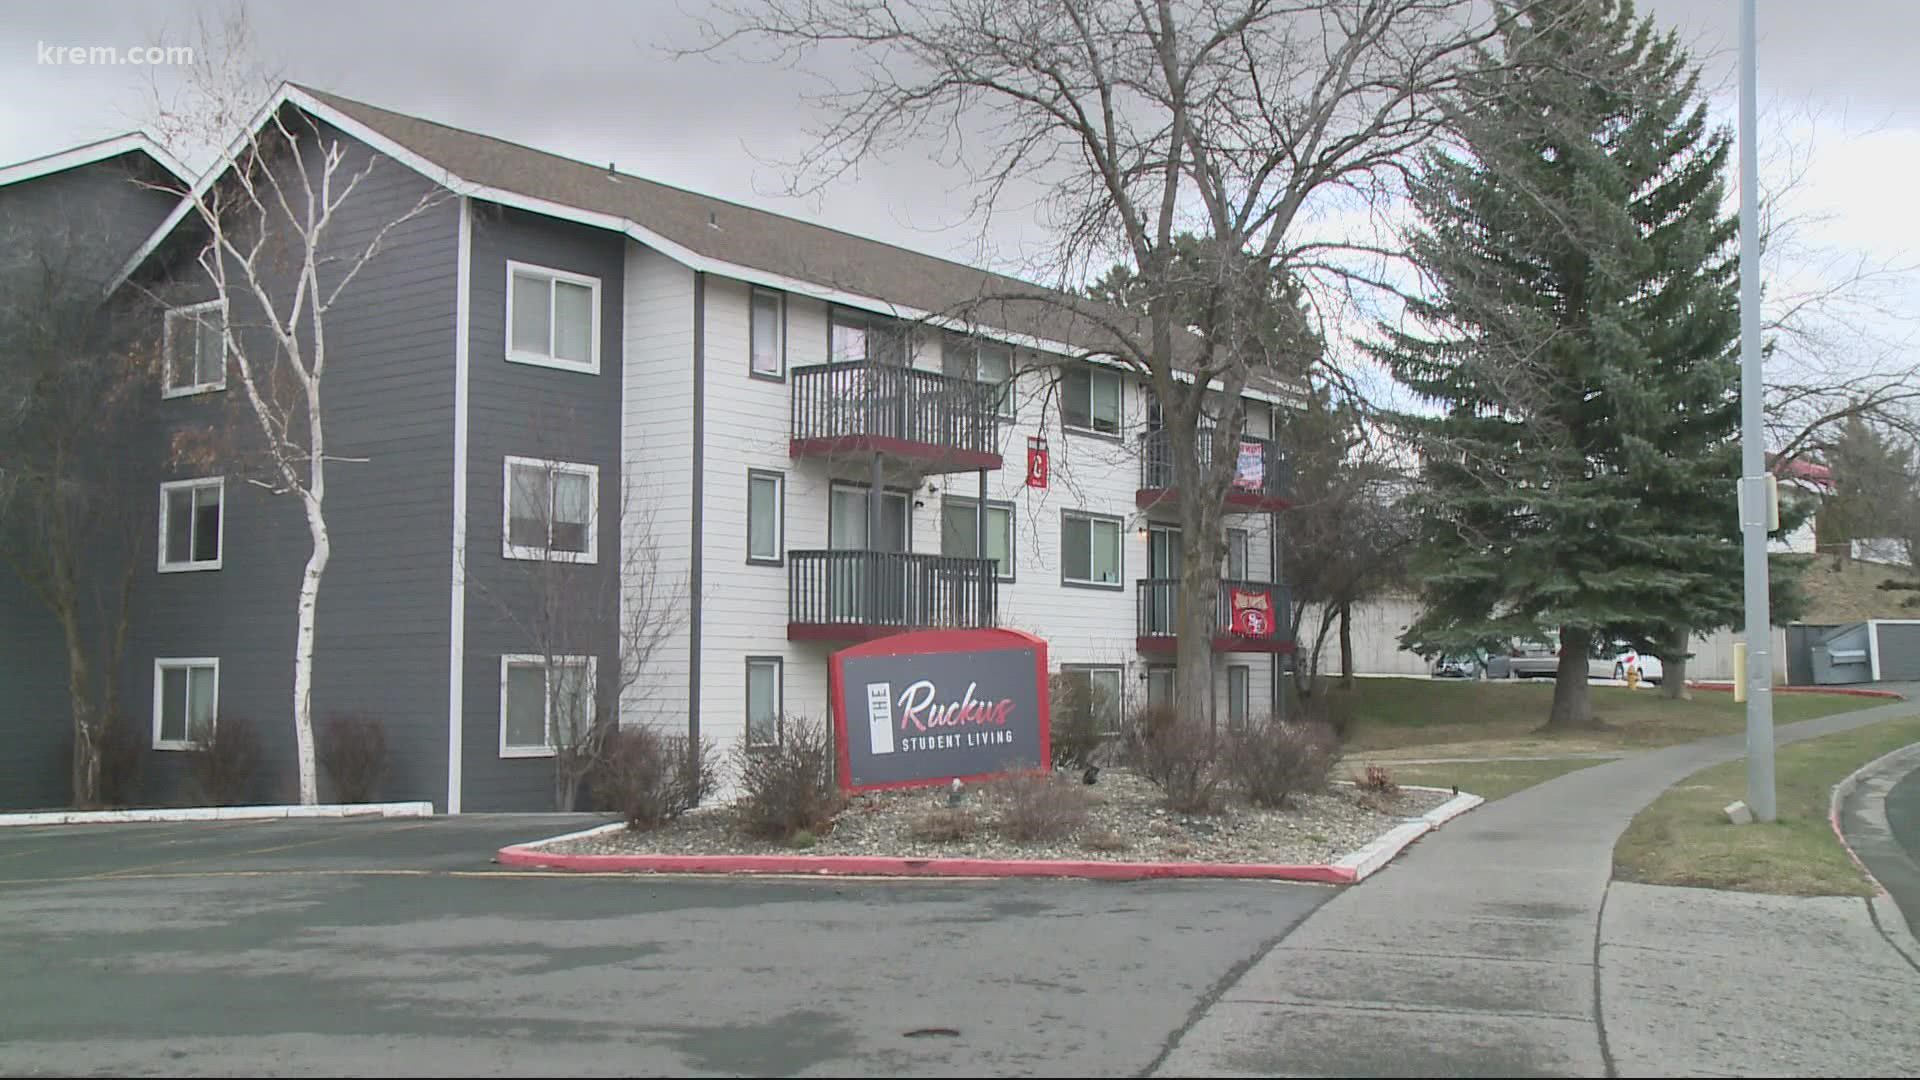 Pullman police discovered a dozen dead animals inside a College Hill apartment in Pullman on Wednesday.